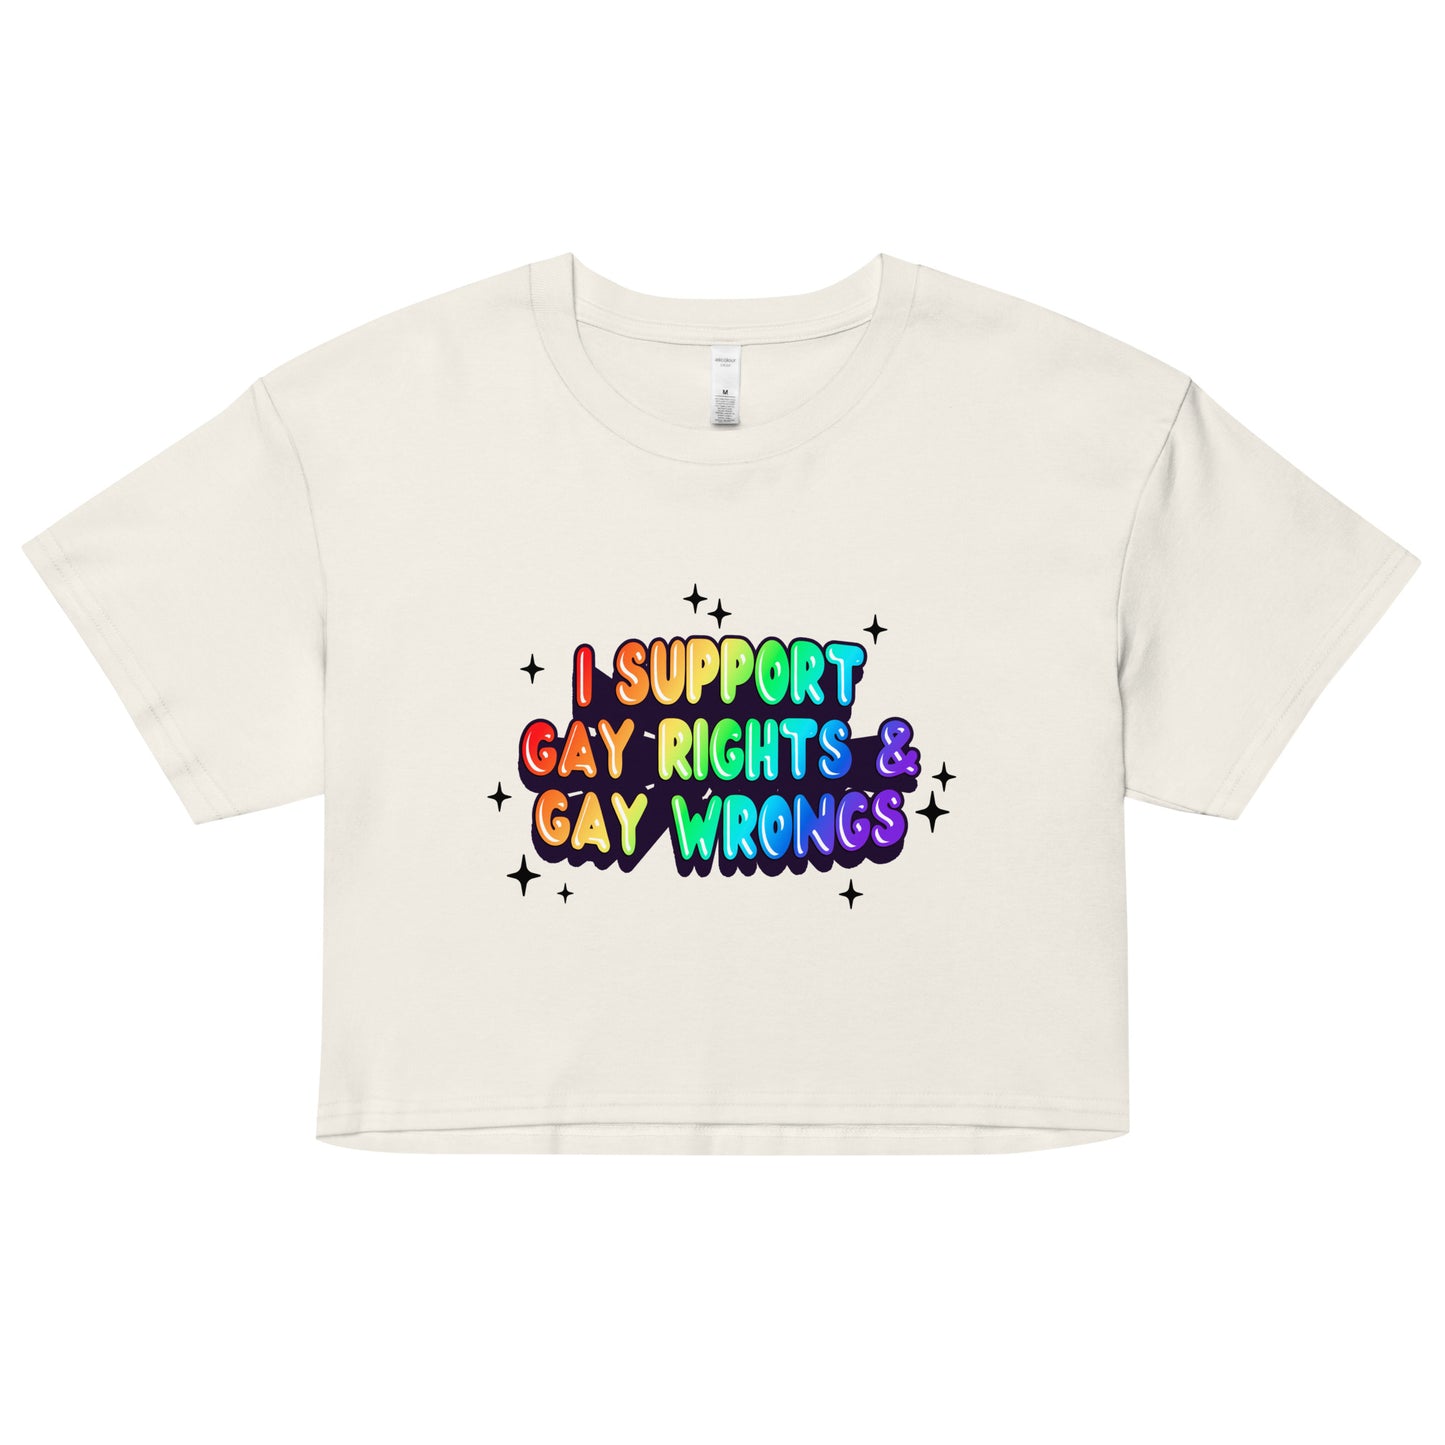 I Support Gay Rights & Gay Wrongs Women’s crop top